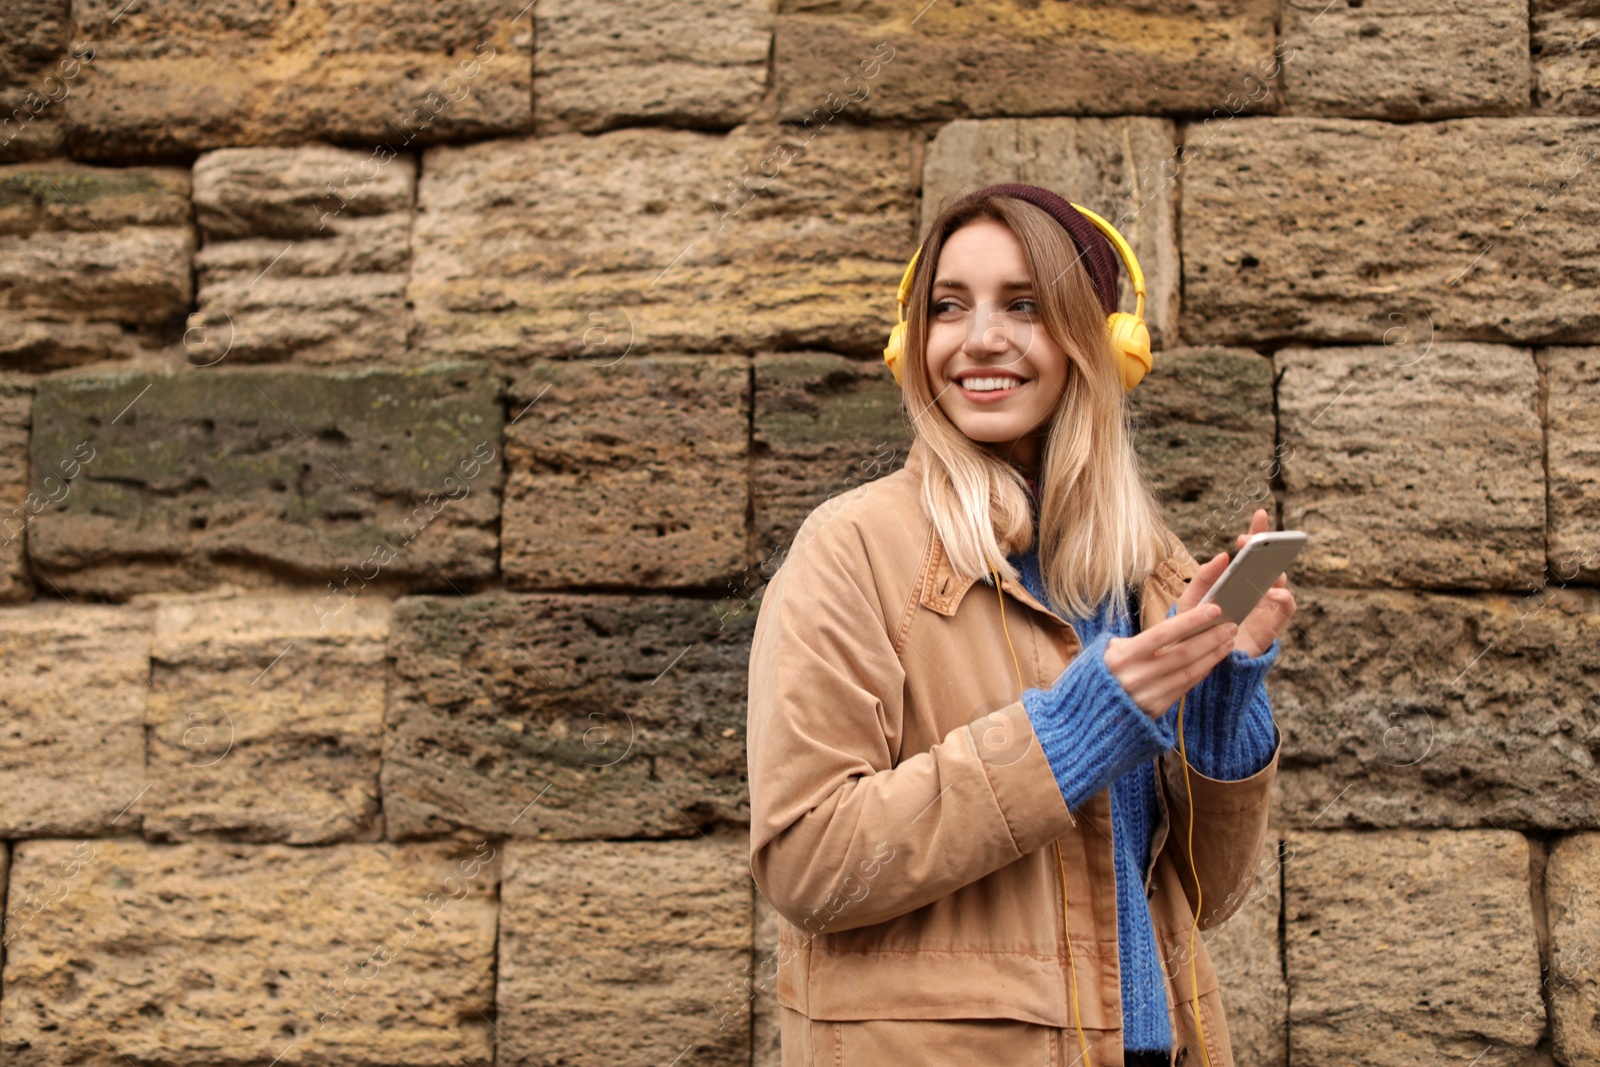 Photo of Young woman with headphones listening to music near stone wall. Space for text